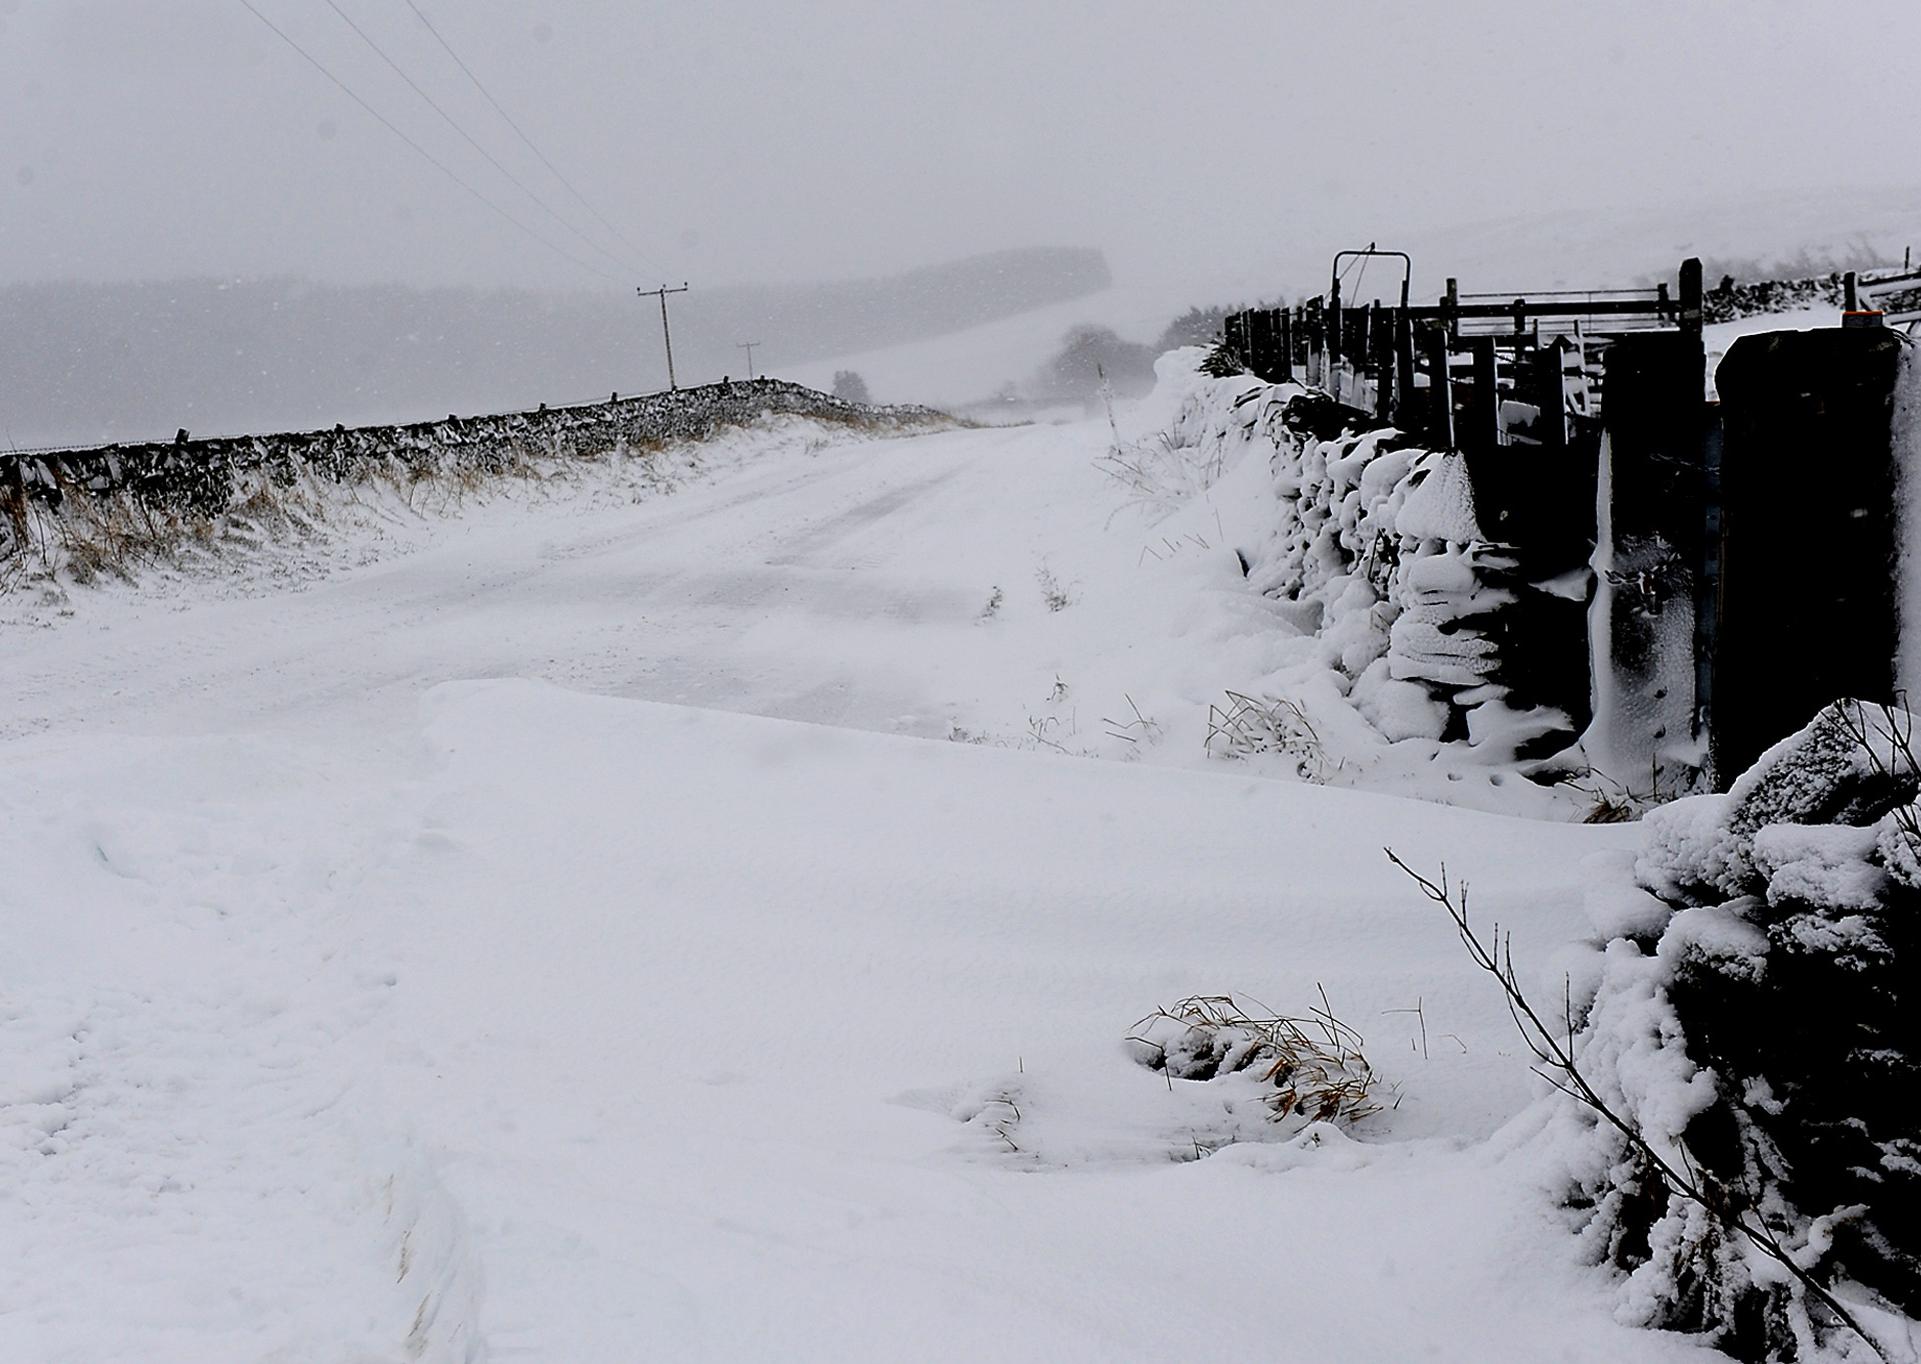 The Ashkirk road from Ettrickbridge  filled in with snow as  blizzards take their toll.